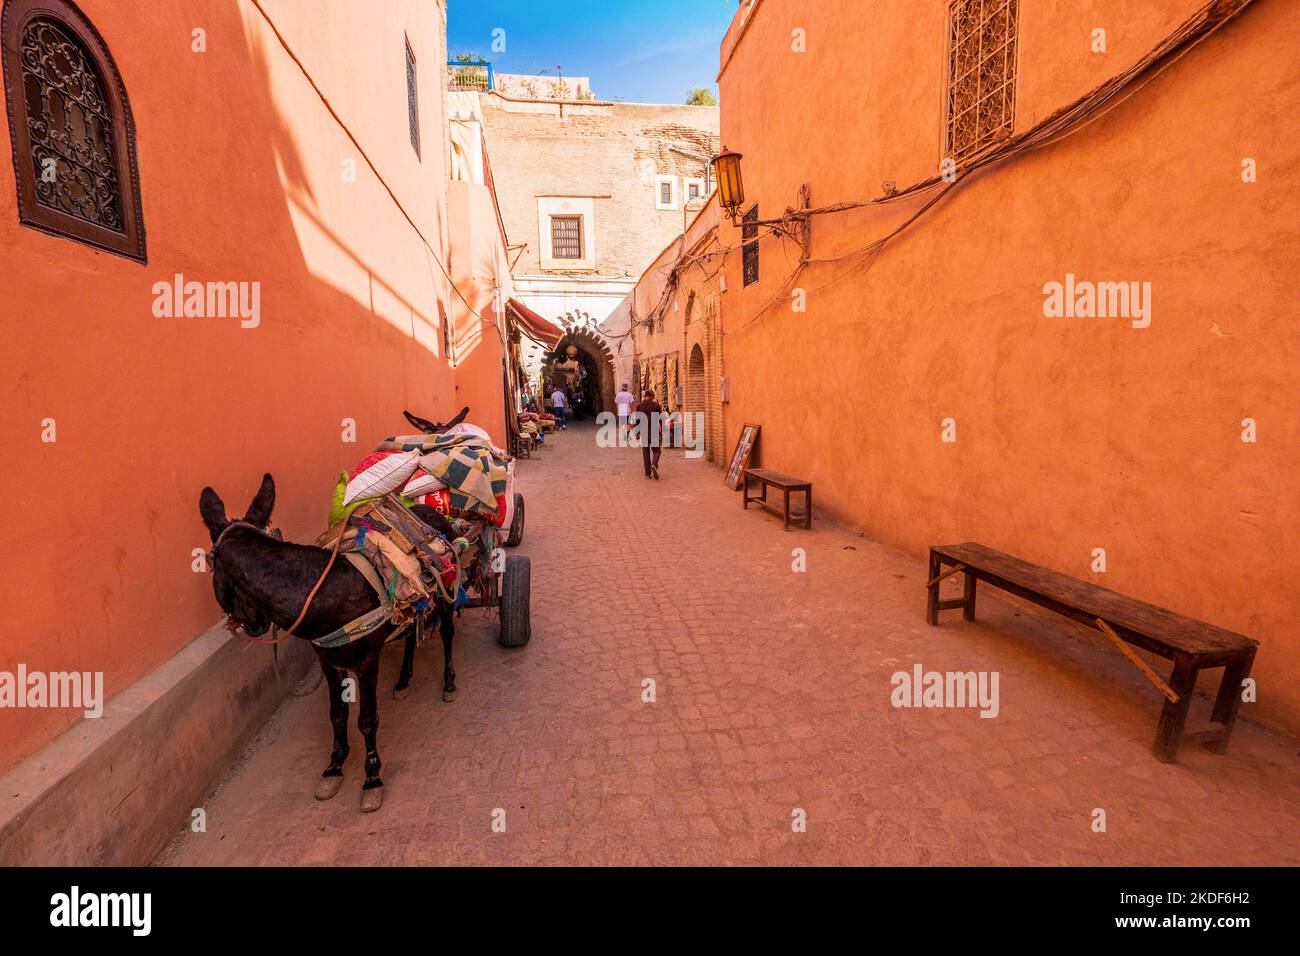 In the medina ( old town) of Marrakech, Morocco donkeys are still used for transport Stock Photo